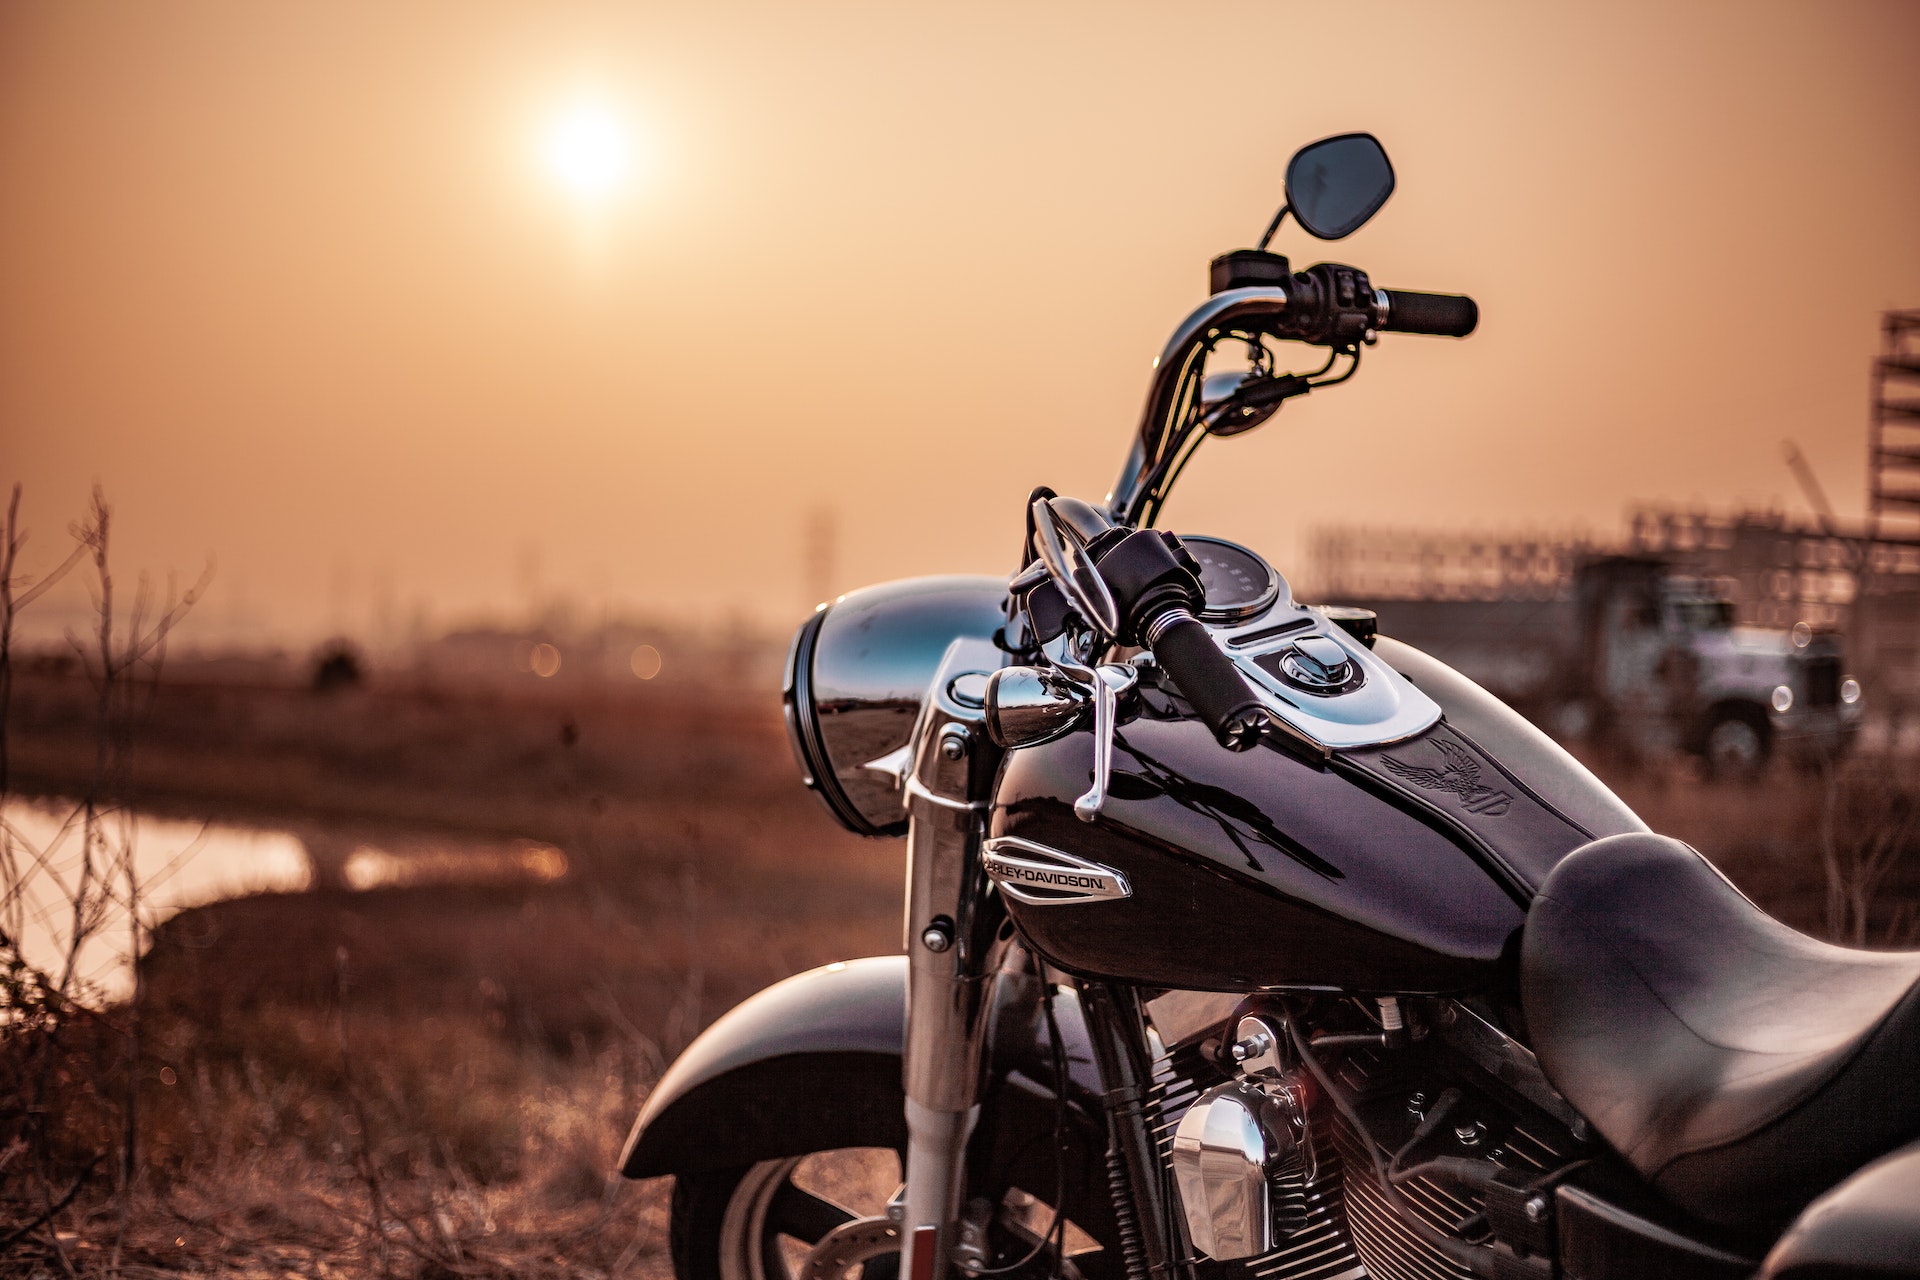 Starting Your Own Business Selling Motorcycles Online